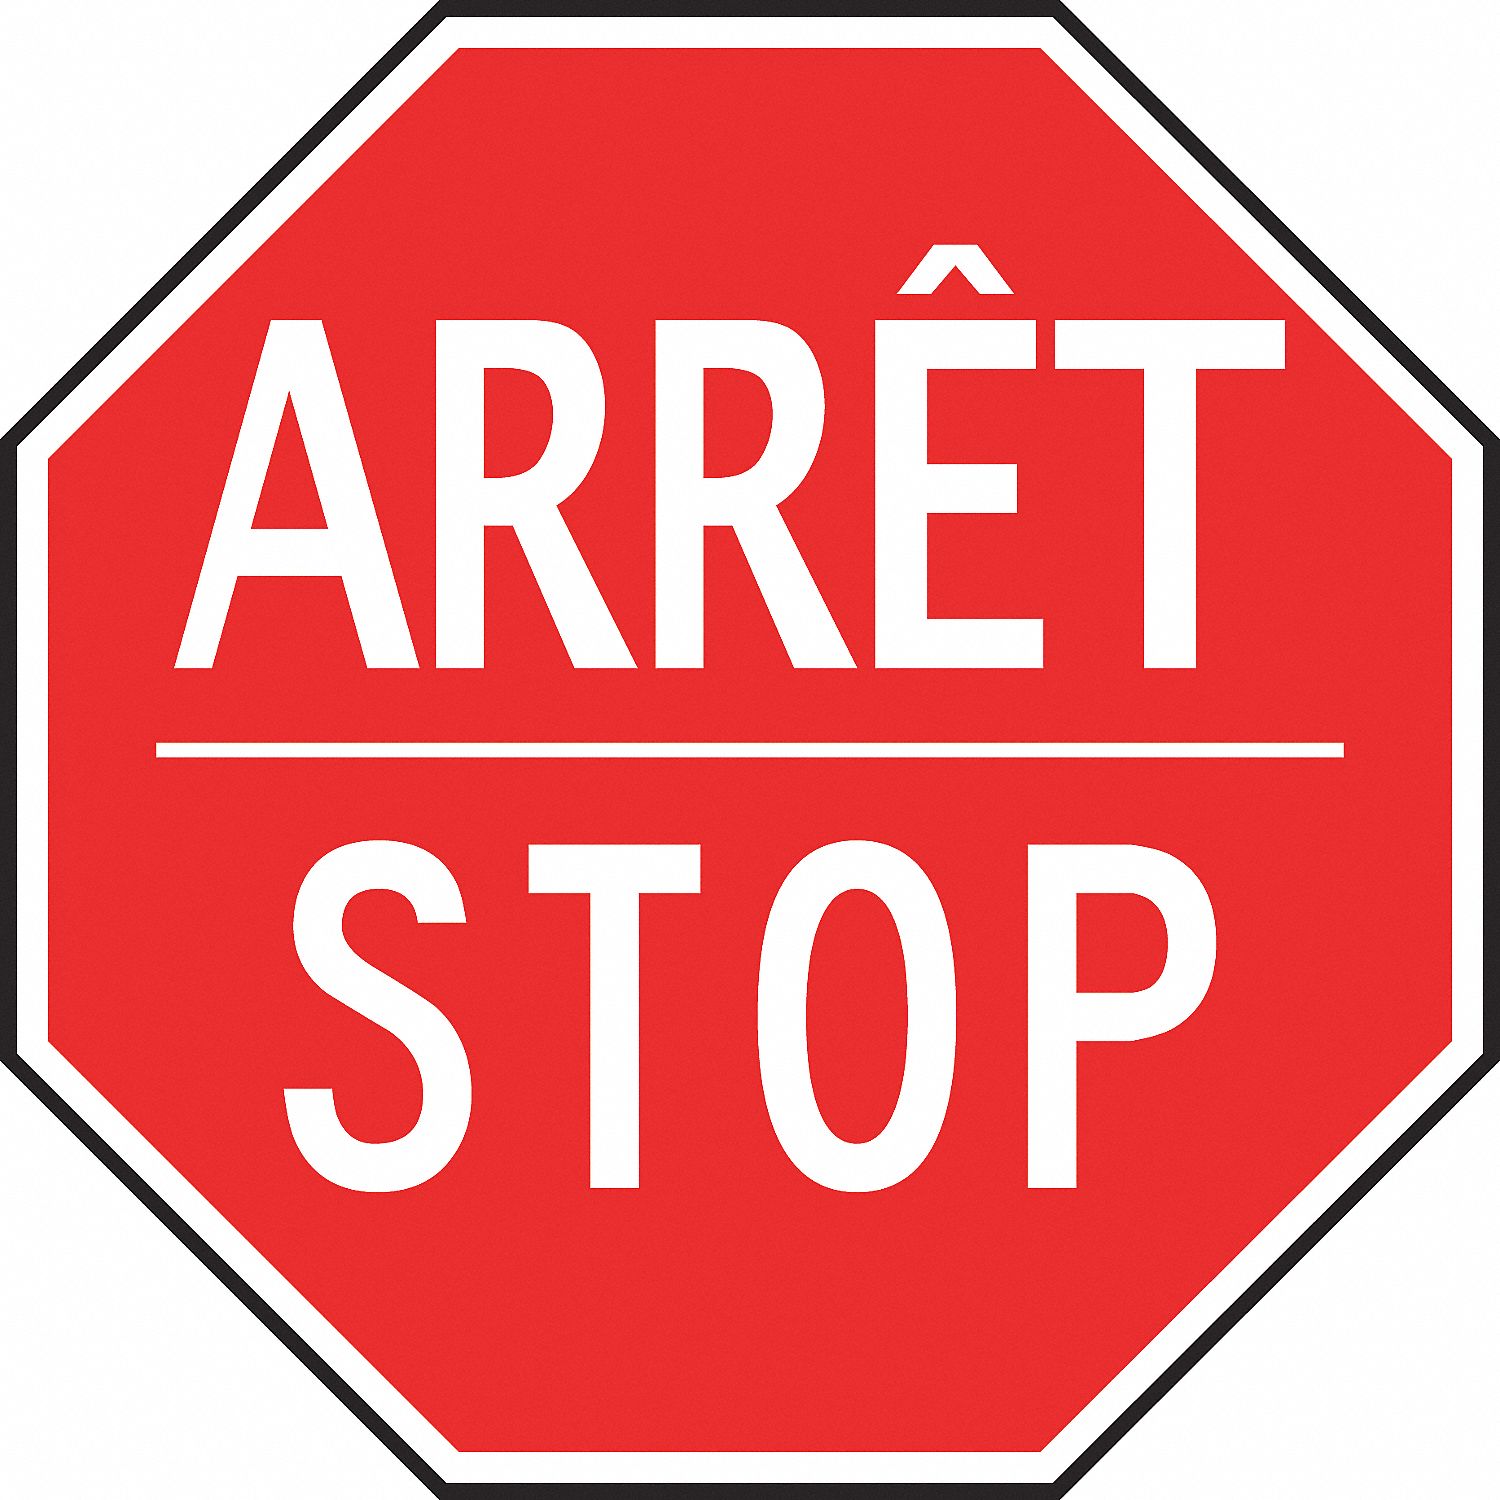 ACCUFORM SIGNS BILINGUAL FRENCH/ENGLISH STOP SIGN,  HIGH-INTENSITY/REFLECTIVE, RED, 24 X 24 IN, ALUMINUM - Road Construction,  Parking and Traffic Signs - ACFFRR384HP